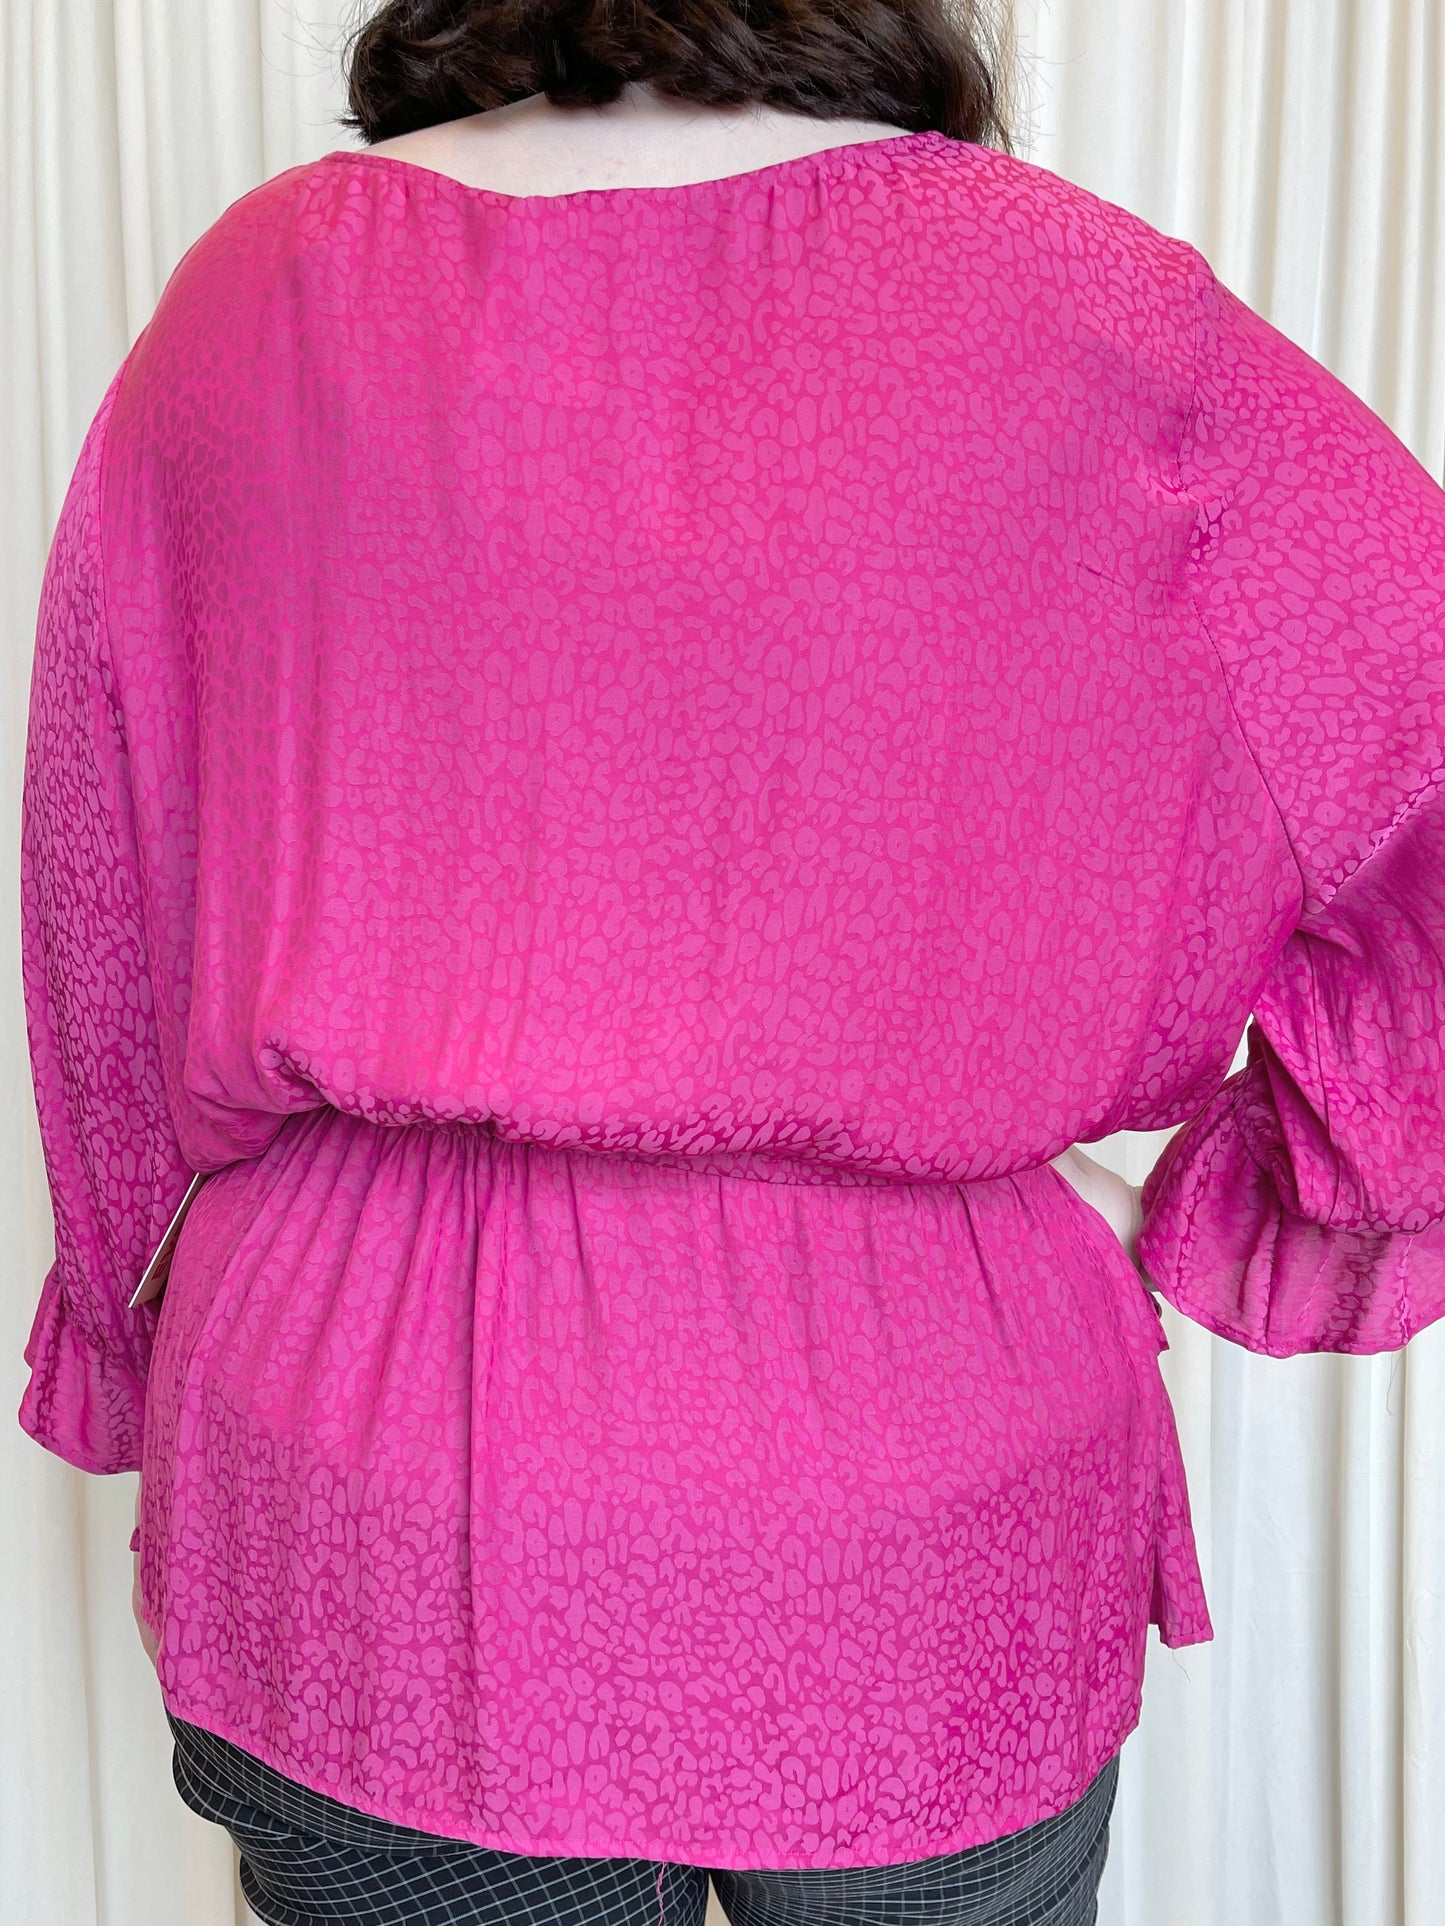 NWT Pink Leopard Satin Blouse - 3X-Large